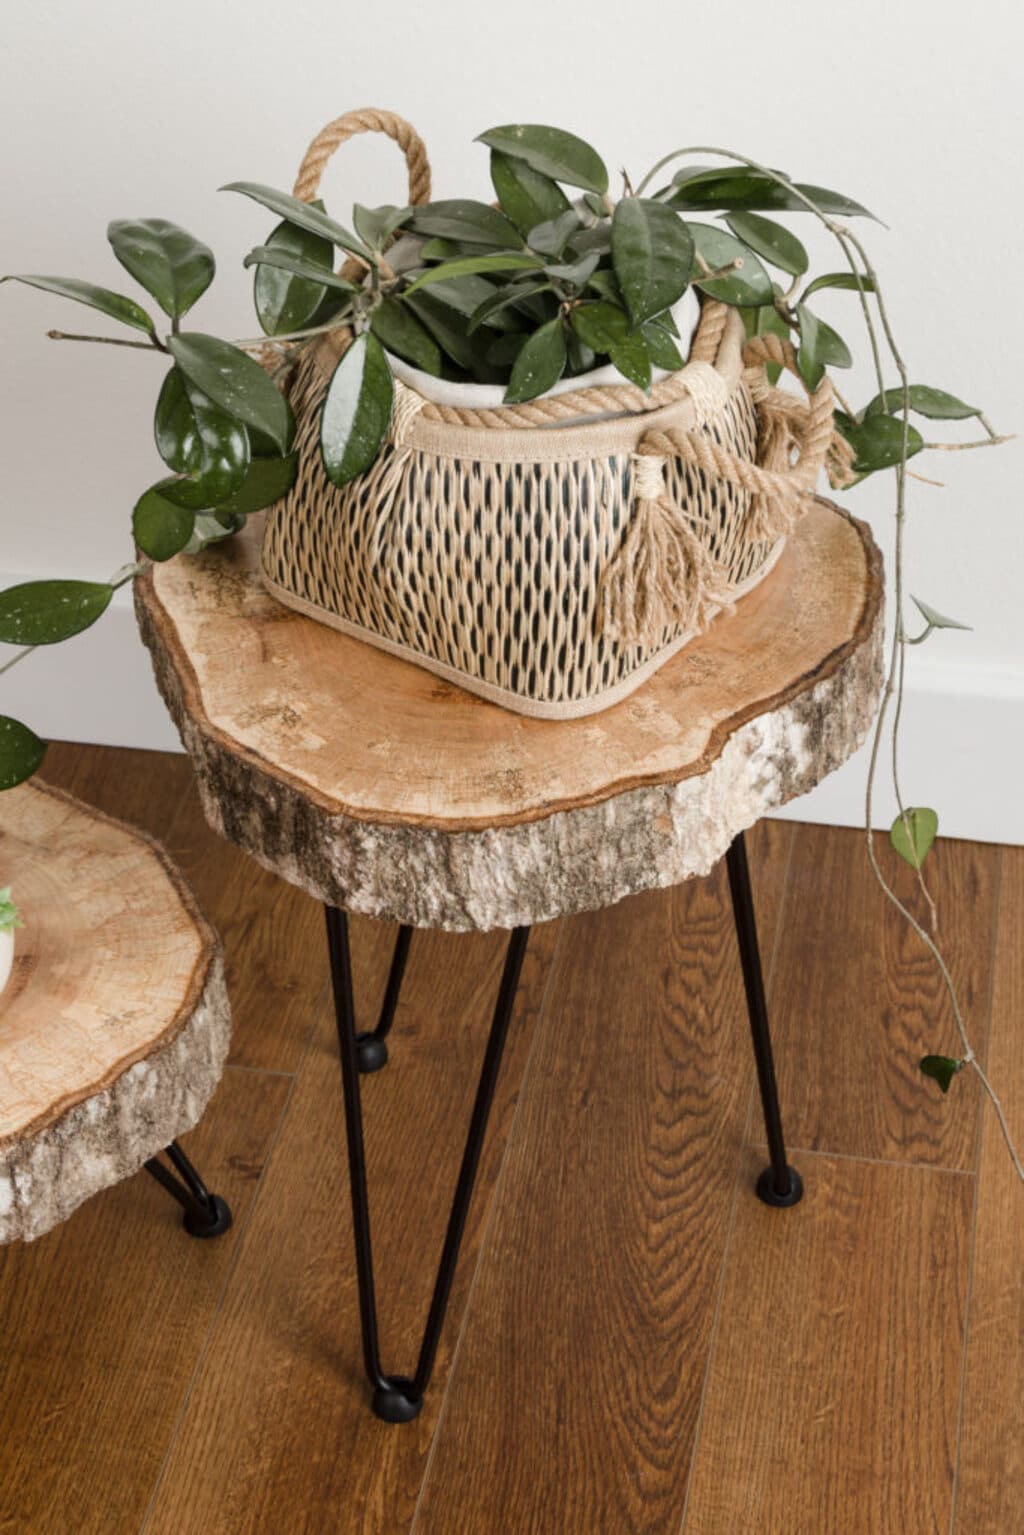 A wooden edge table topped with a basket filled with plants
